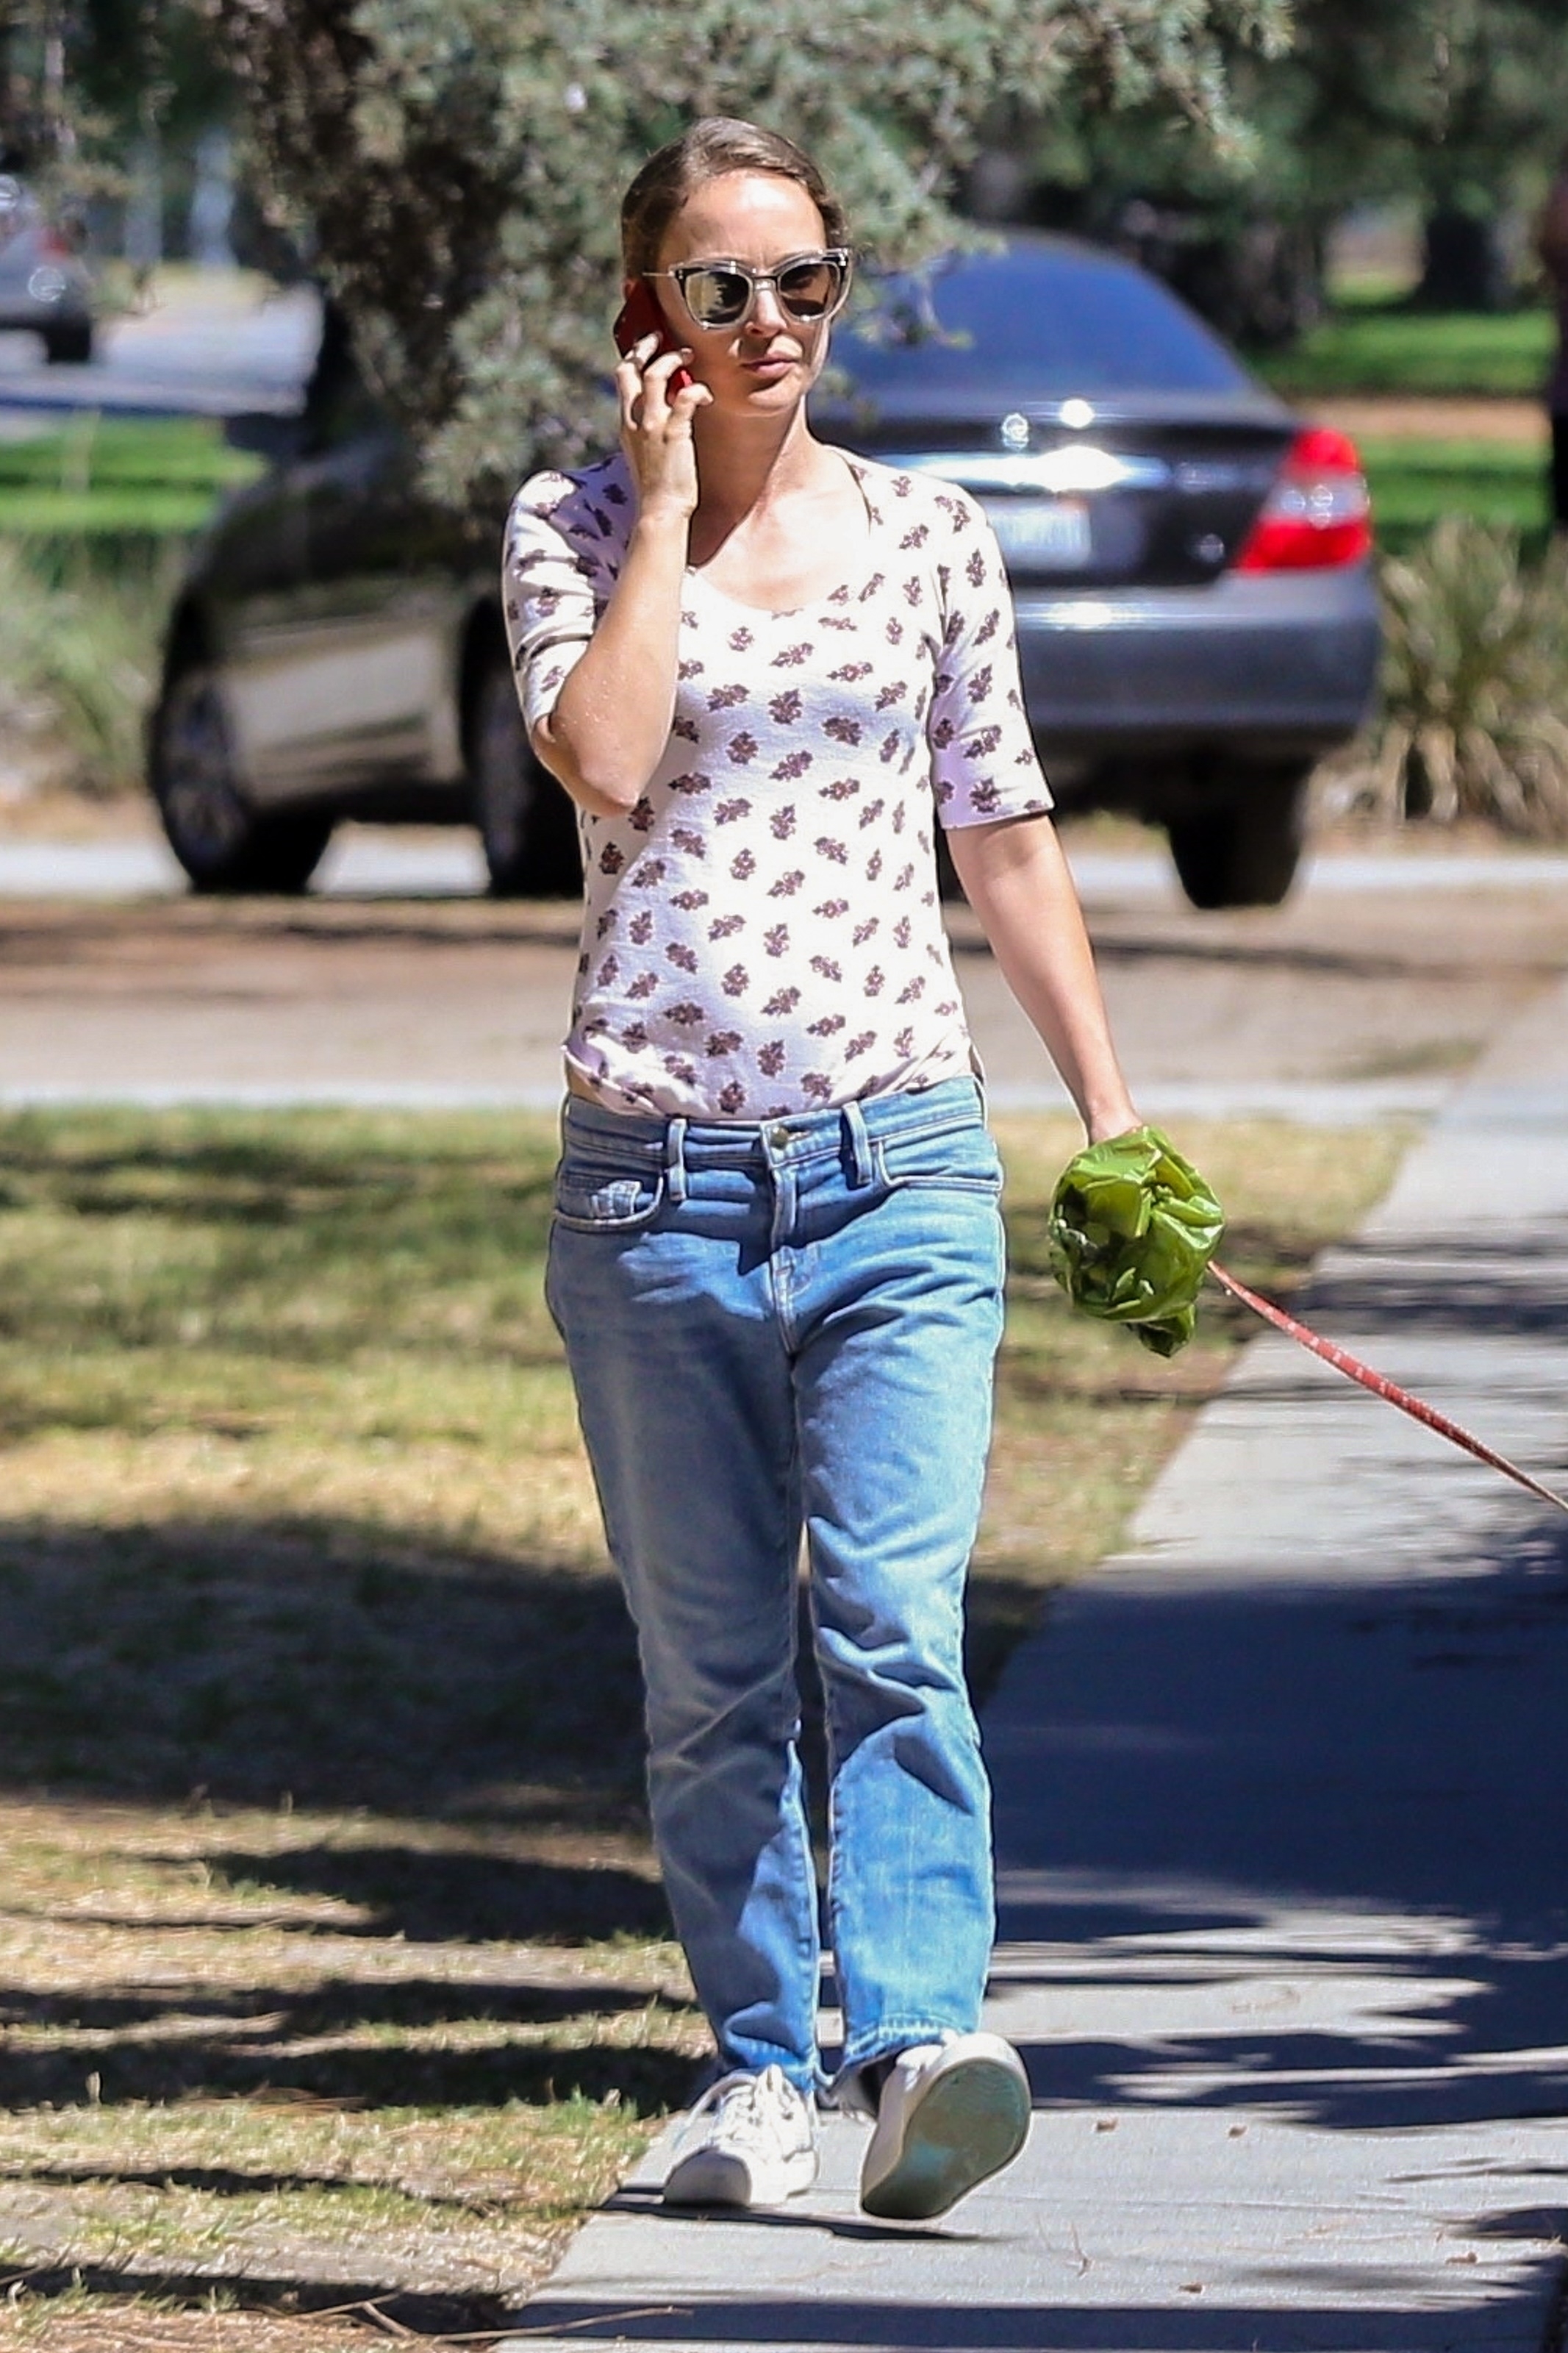 natalie-portman-out-for-a-walk-with-her-dog-near-griffith-park-in-los-feliz-09172018-6.jpg